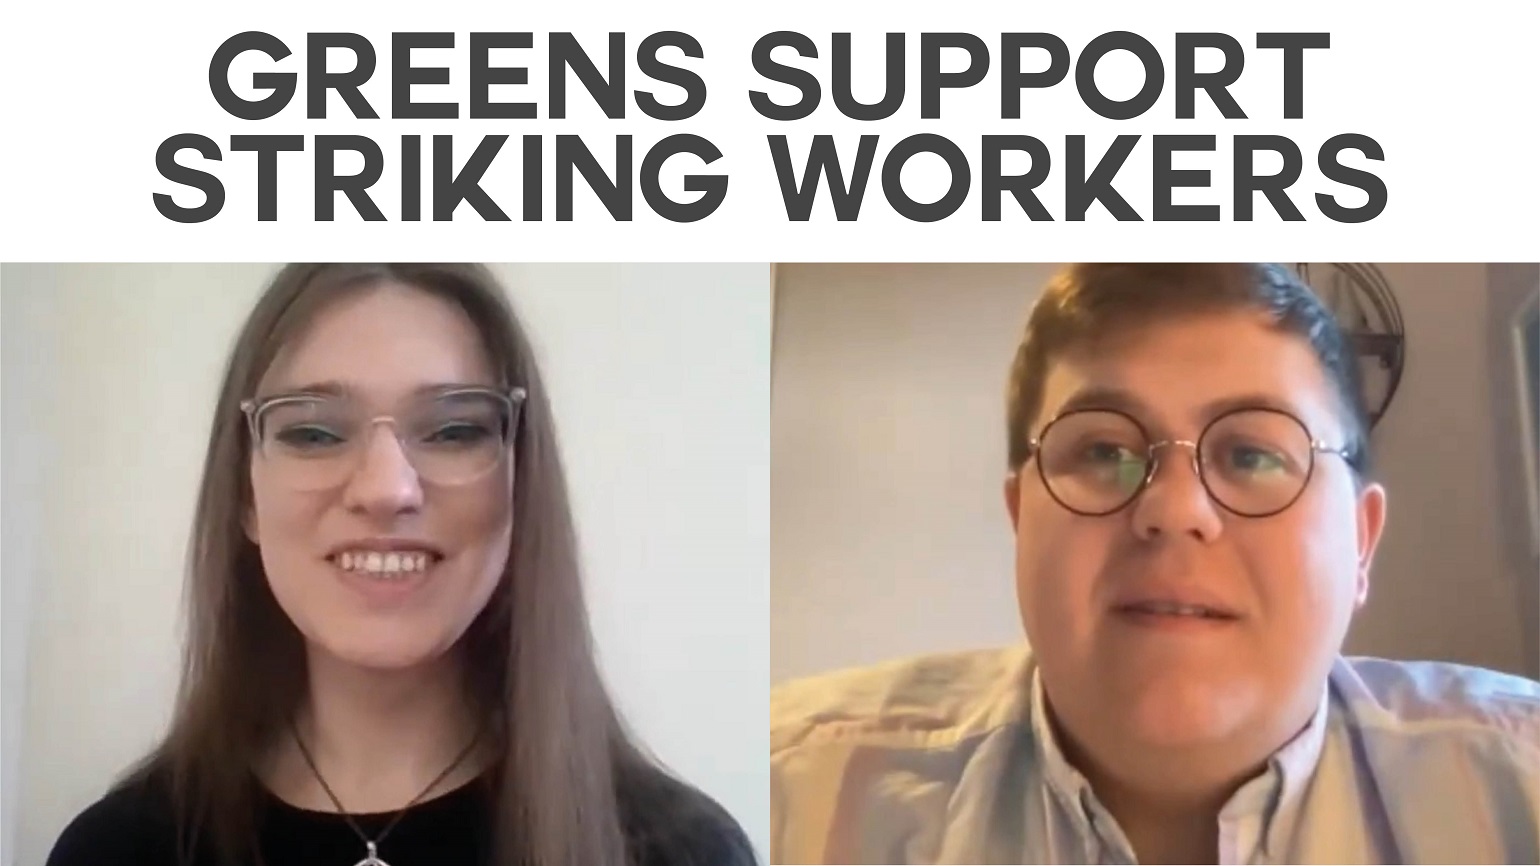 A still of an interview with Jen Bell and Niall Christie with text reading "Greens support striking workers"